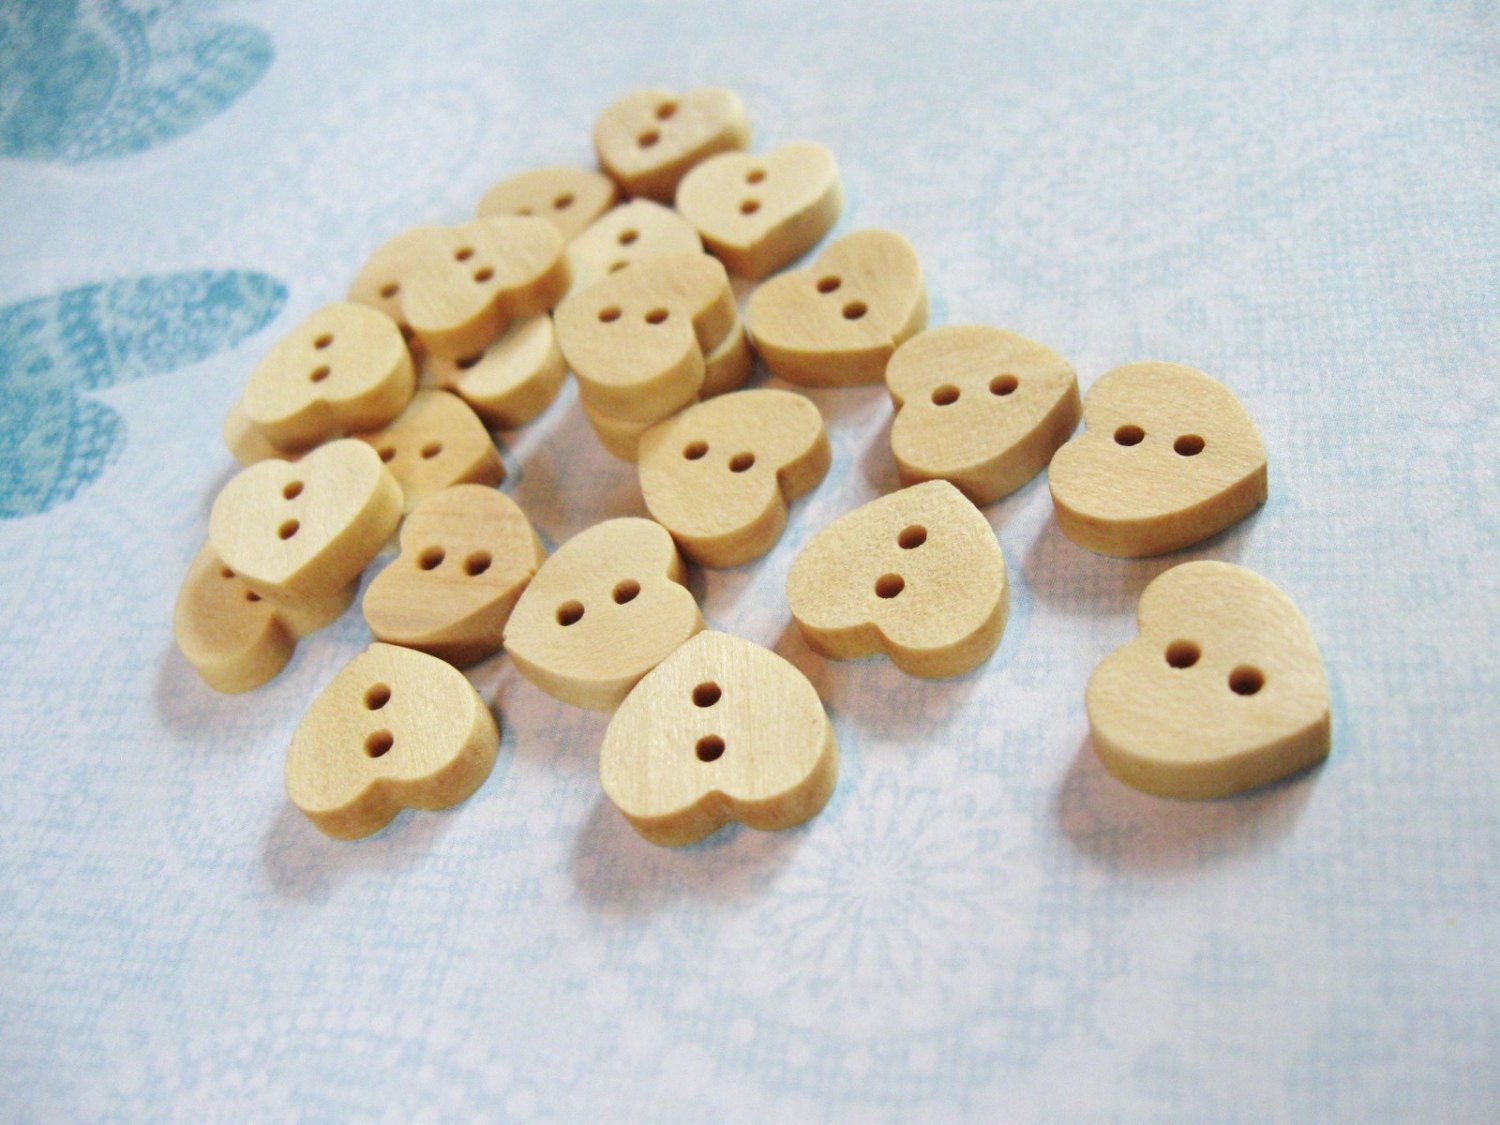 Wooden Heart Shape Button 12mm Mini Unfinished wooden button